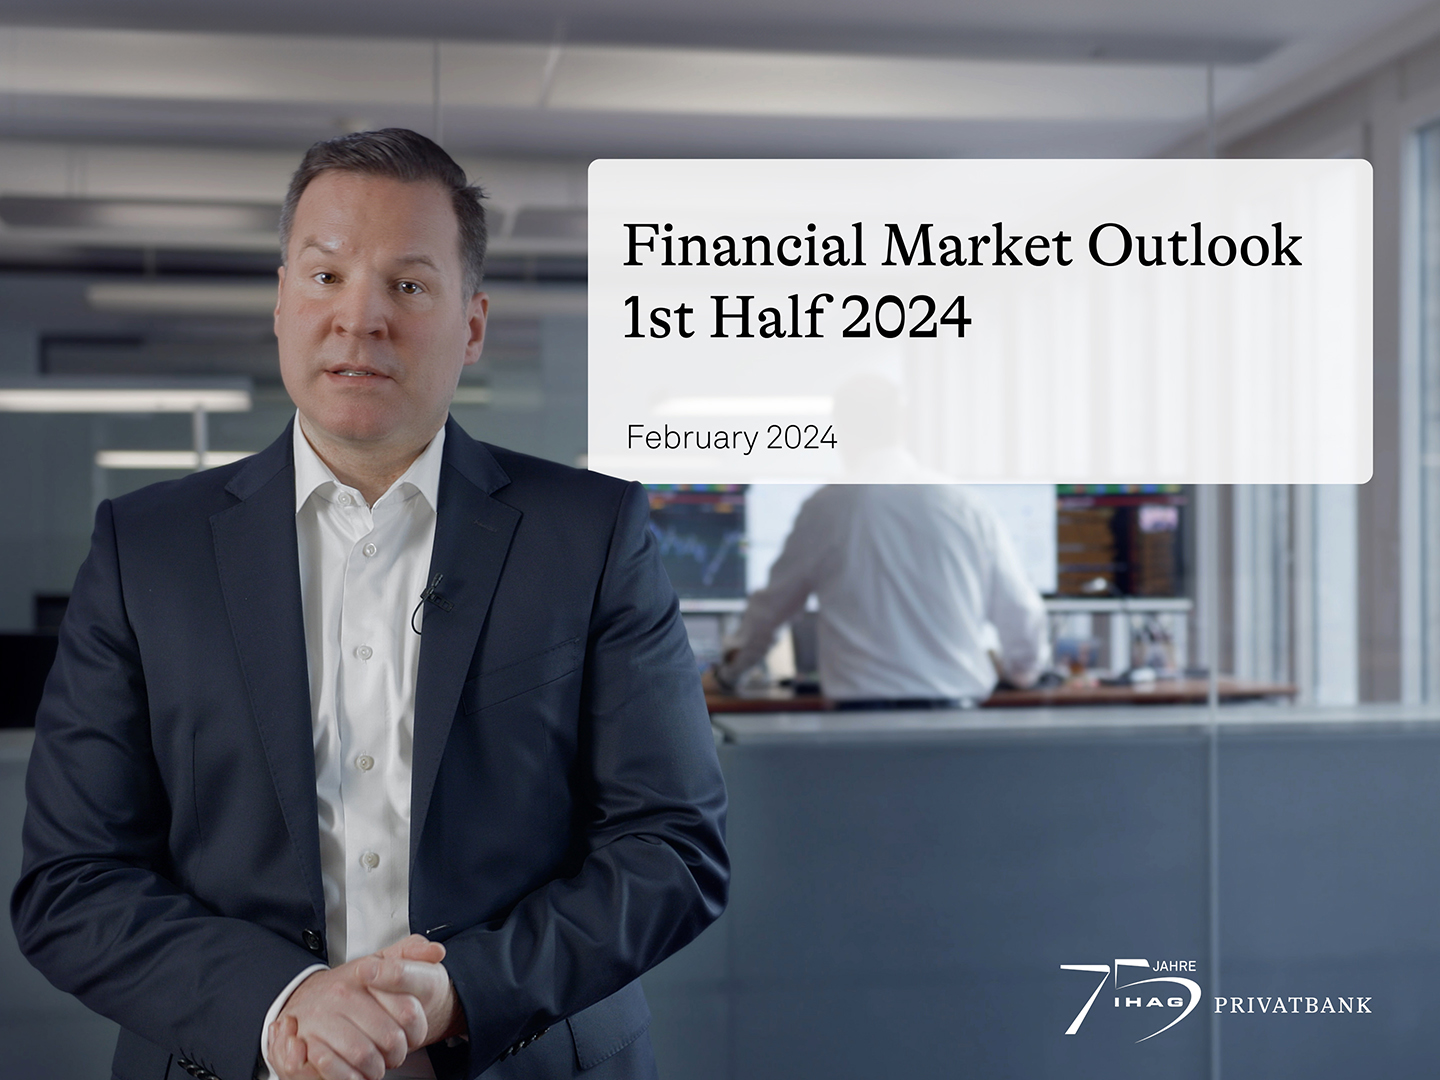 Video: outlook for the first half of 2024